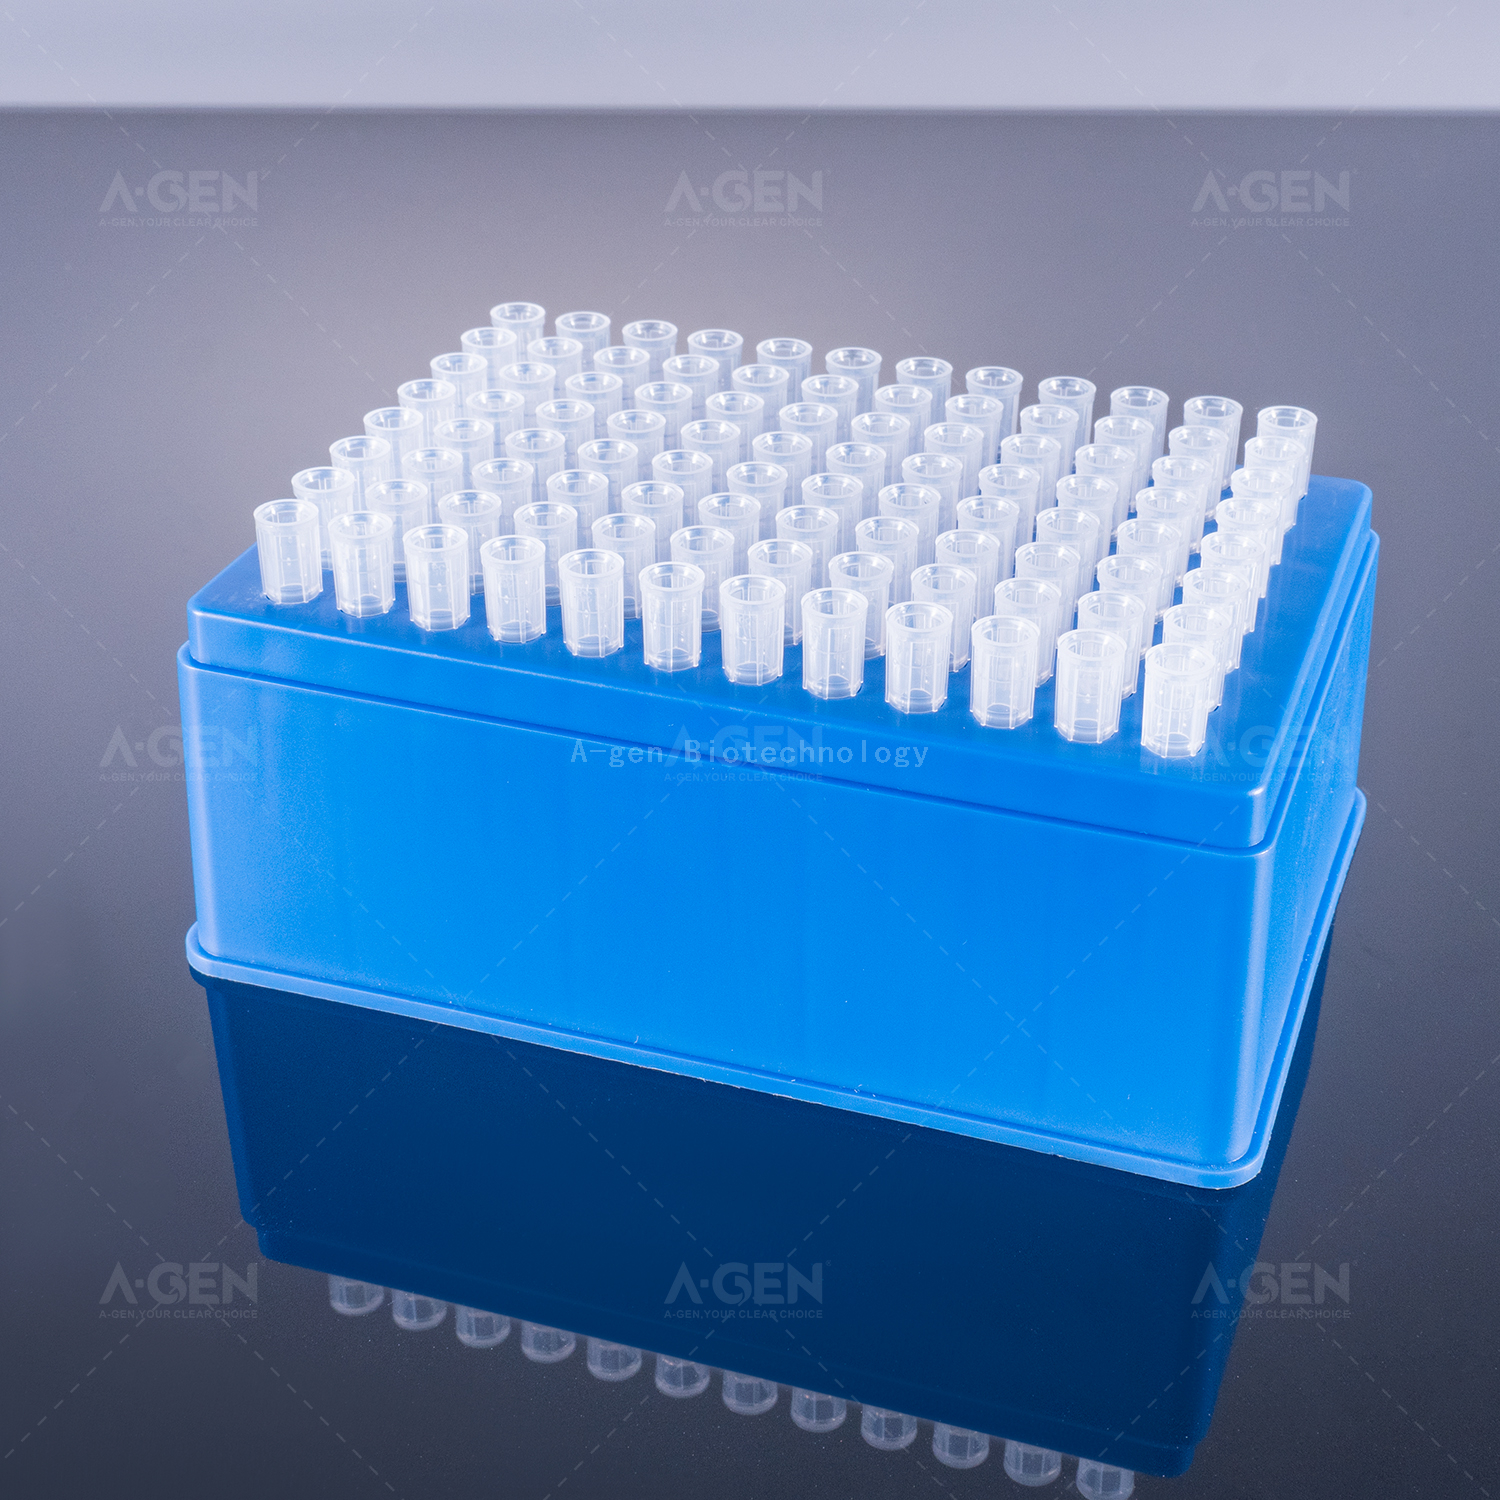 BECKMAN 250μL Clear Robotic PP Pipette Tip (Racked,sterilized) for Liquid Transfer No Filter FX-250-RSL Low Residual